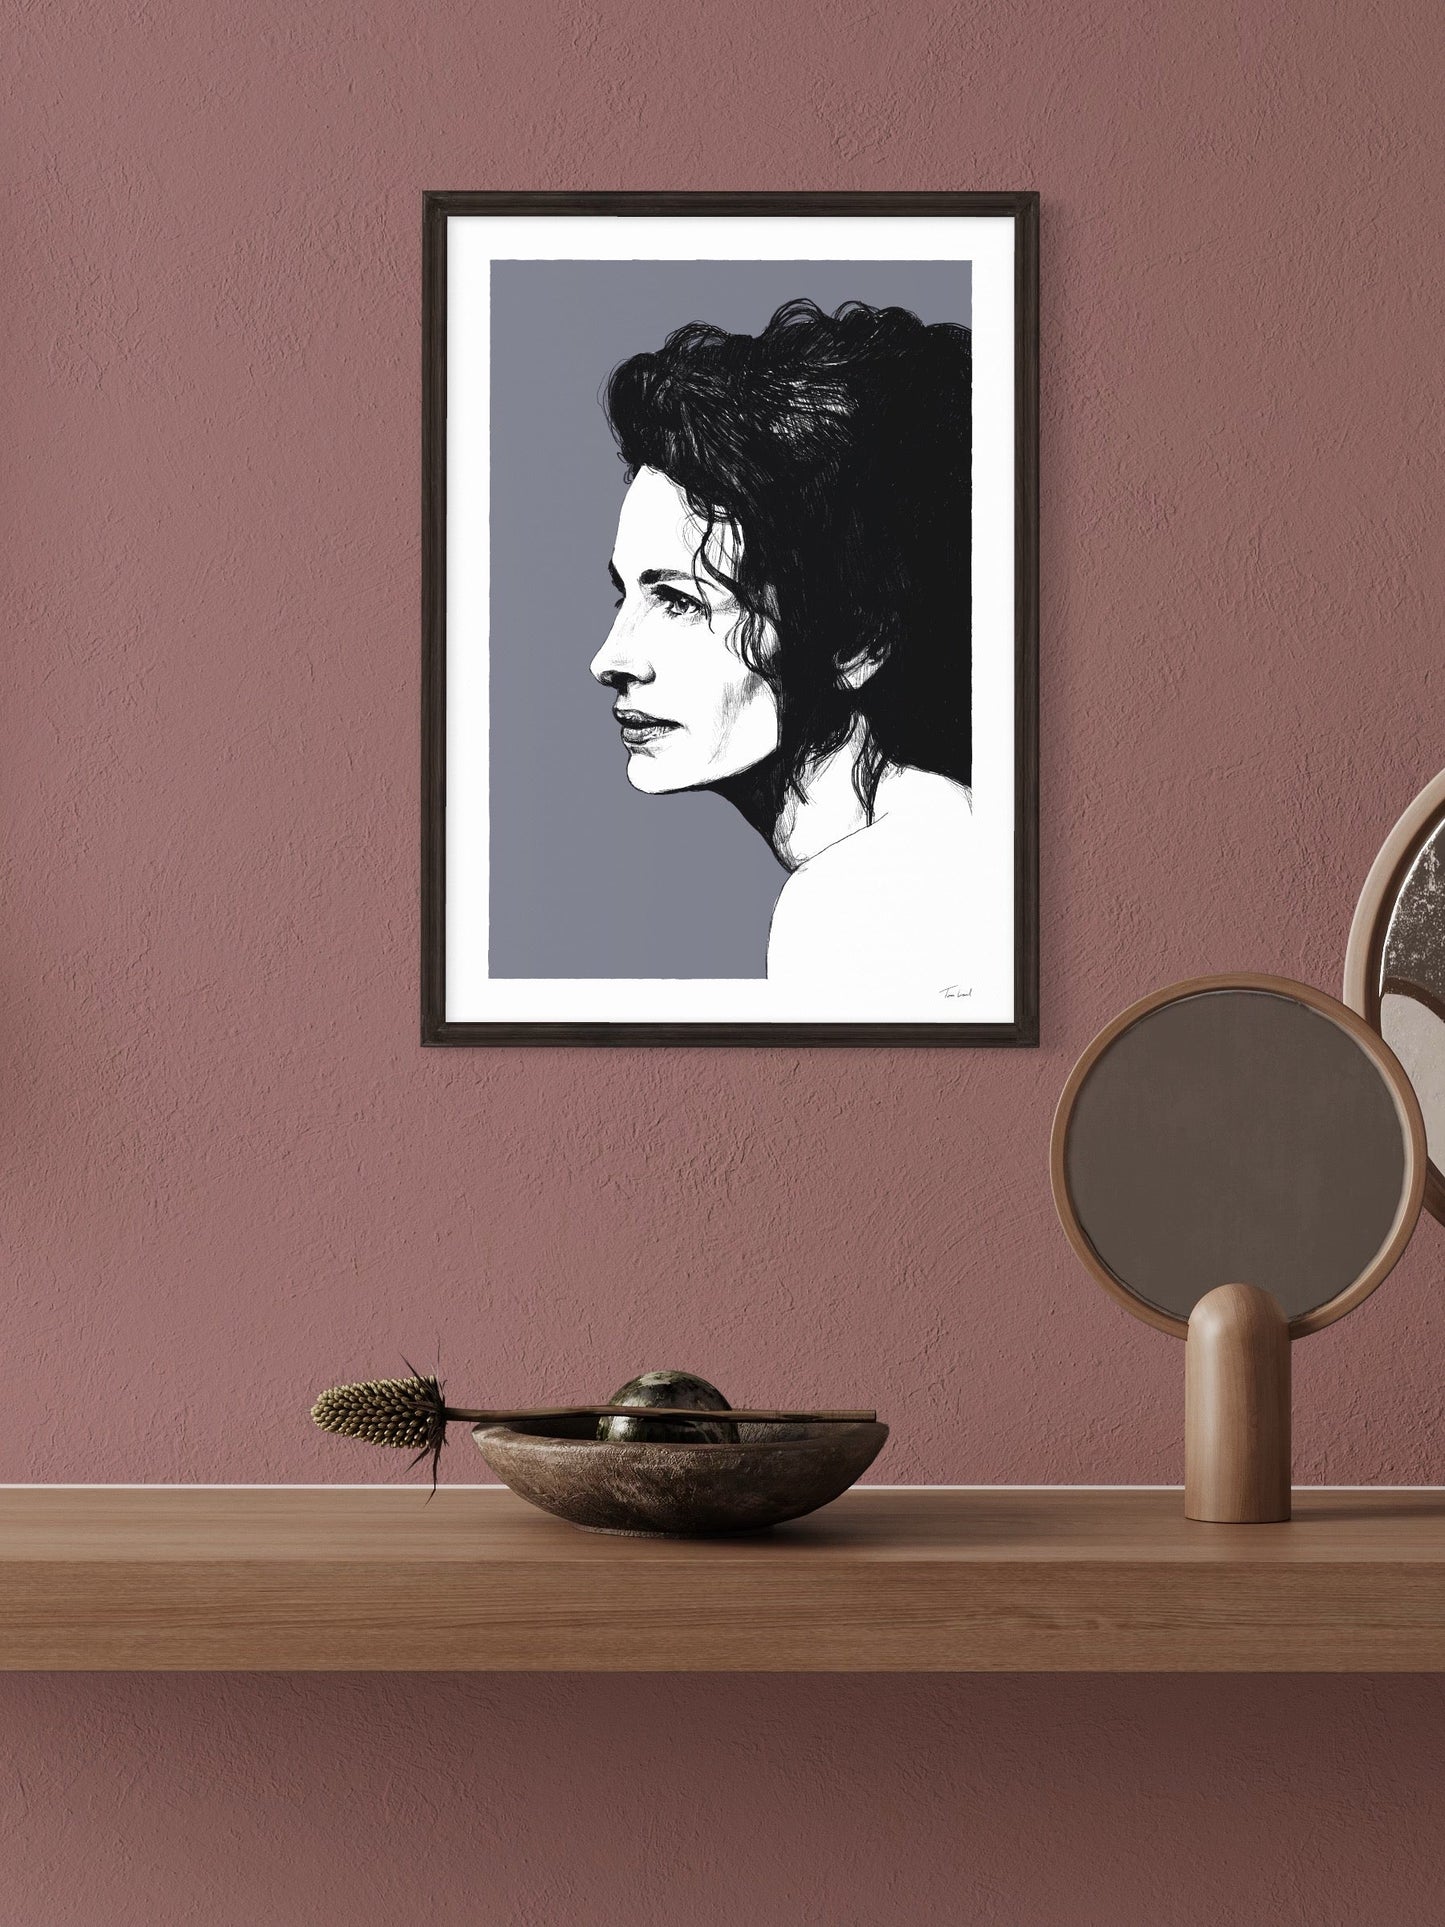 This image shows a giclee wall art print by Tom Laird Illustration of the iconic Pretty Woman actor Julia Roberts, framed in a beautiful room with tasteful modern home decor. This art print is available from Tom Laird Illustration in various sizes.